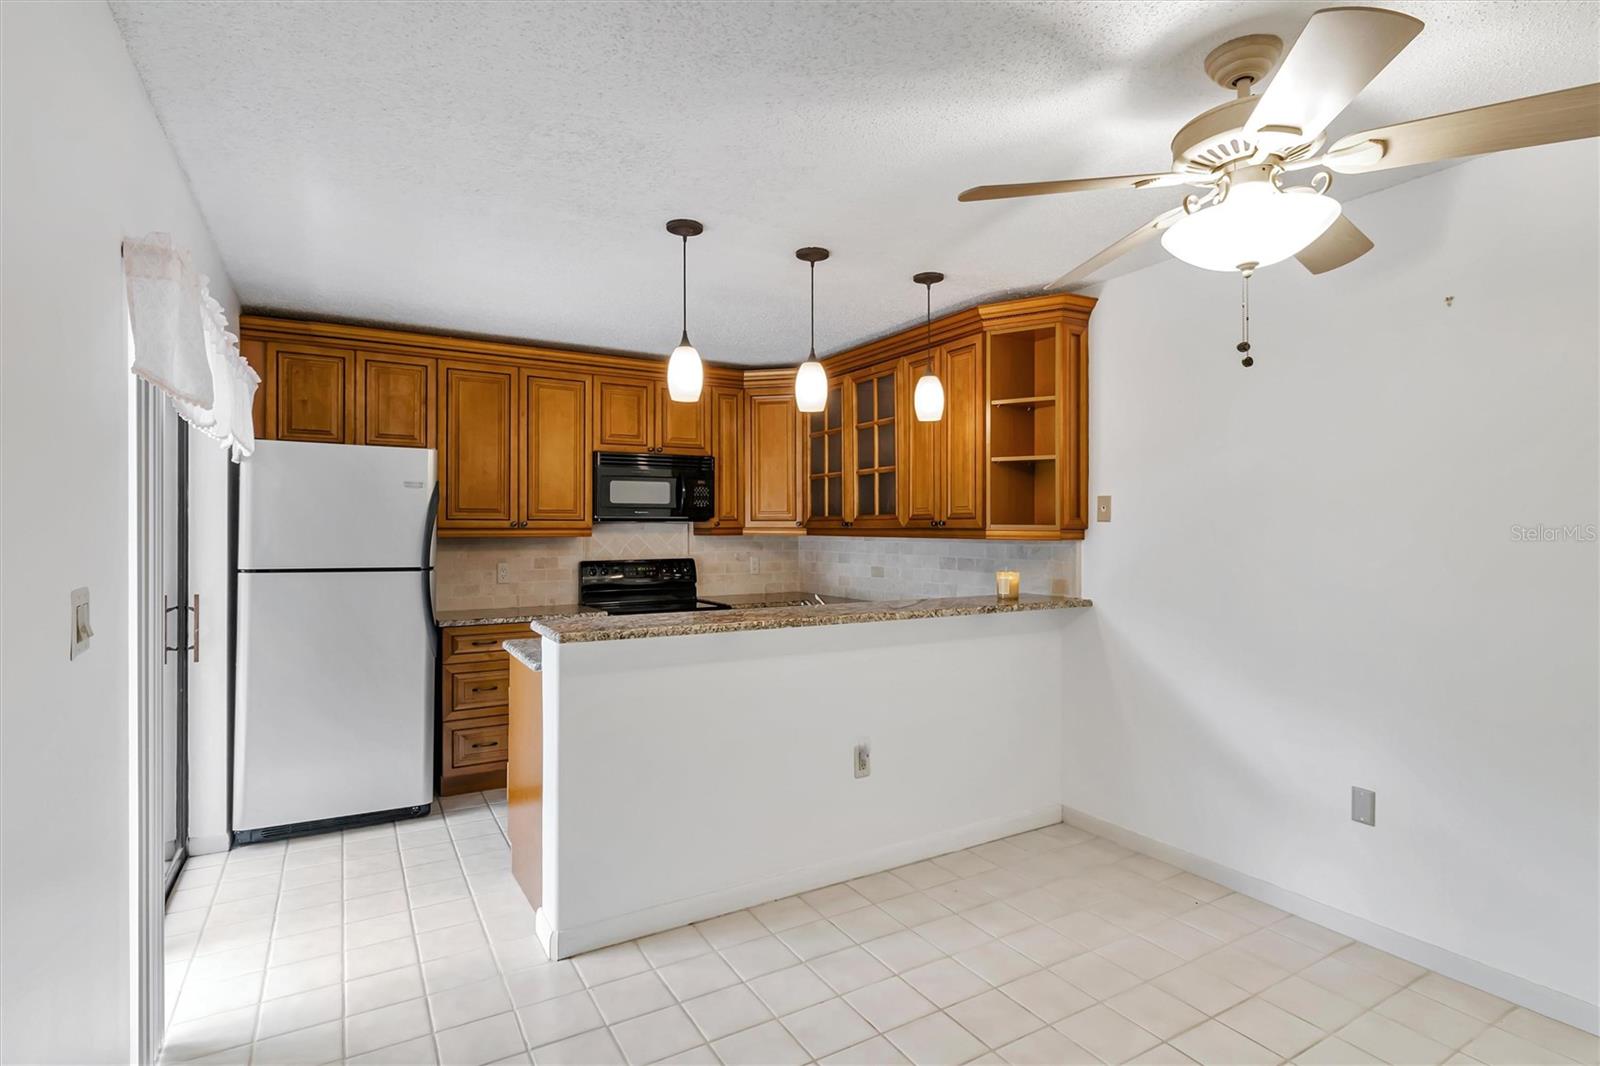 Kitchen with dining space and granite countertops, new cabinets and appliances